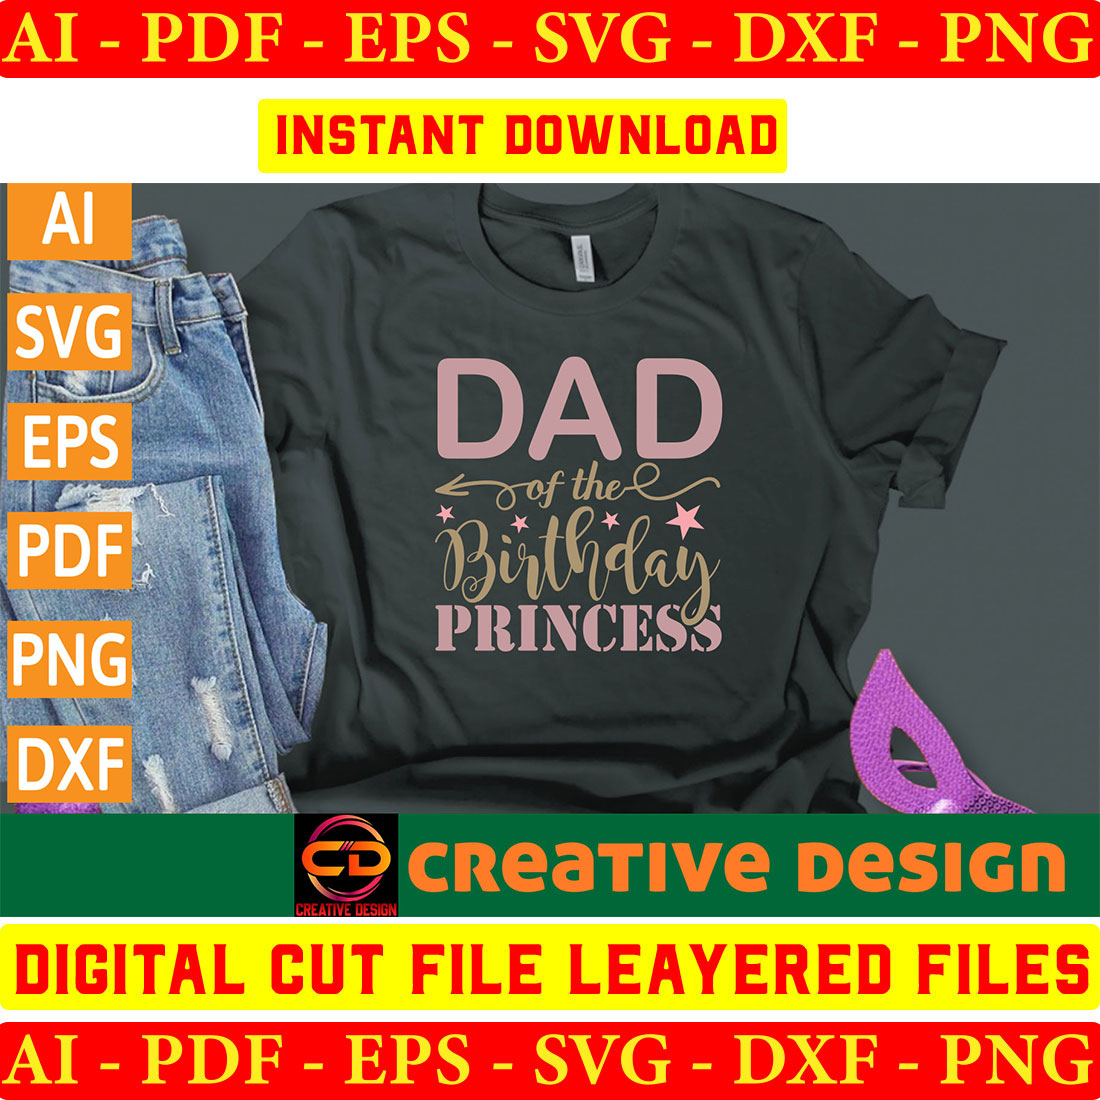 T - shirt that says dad of the birthday princess.